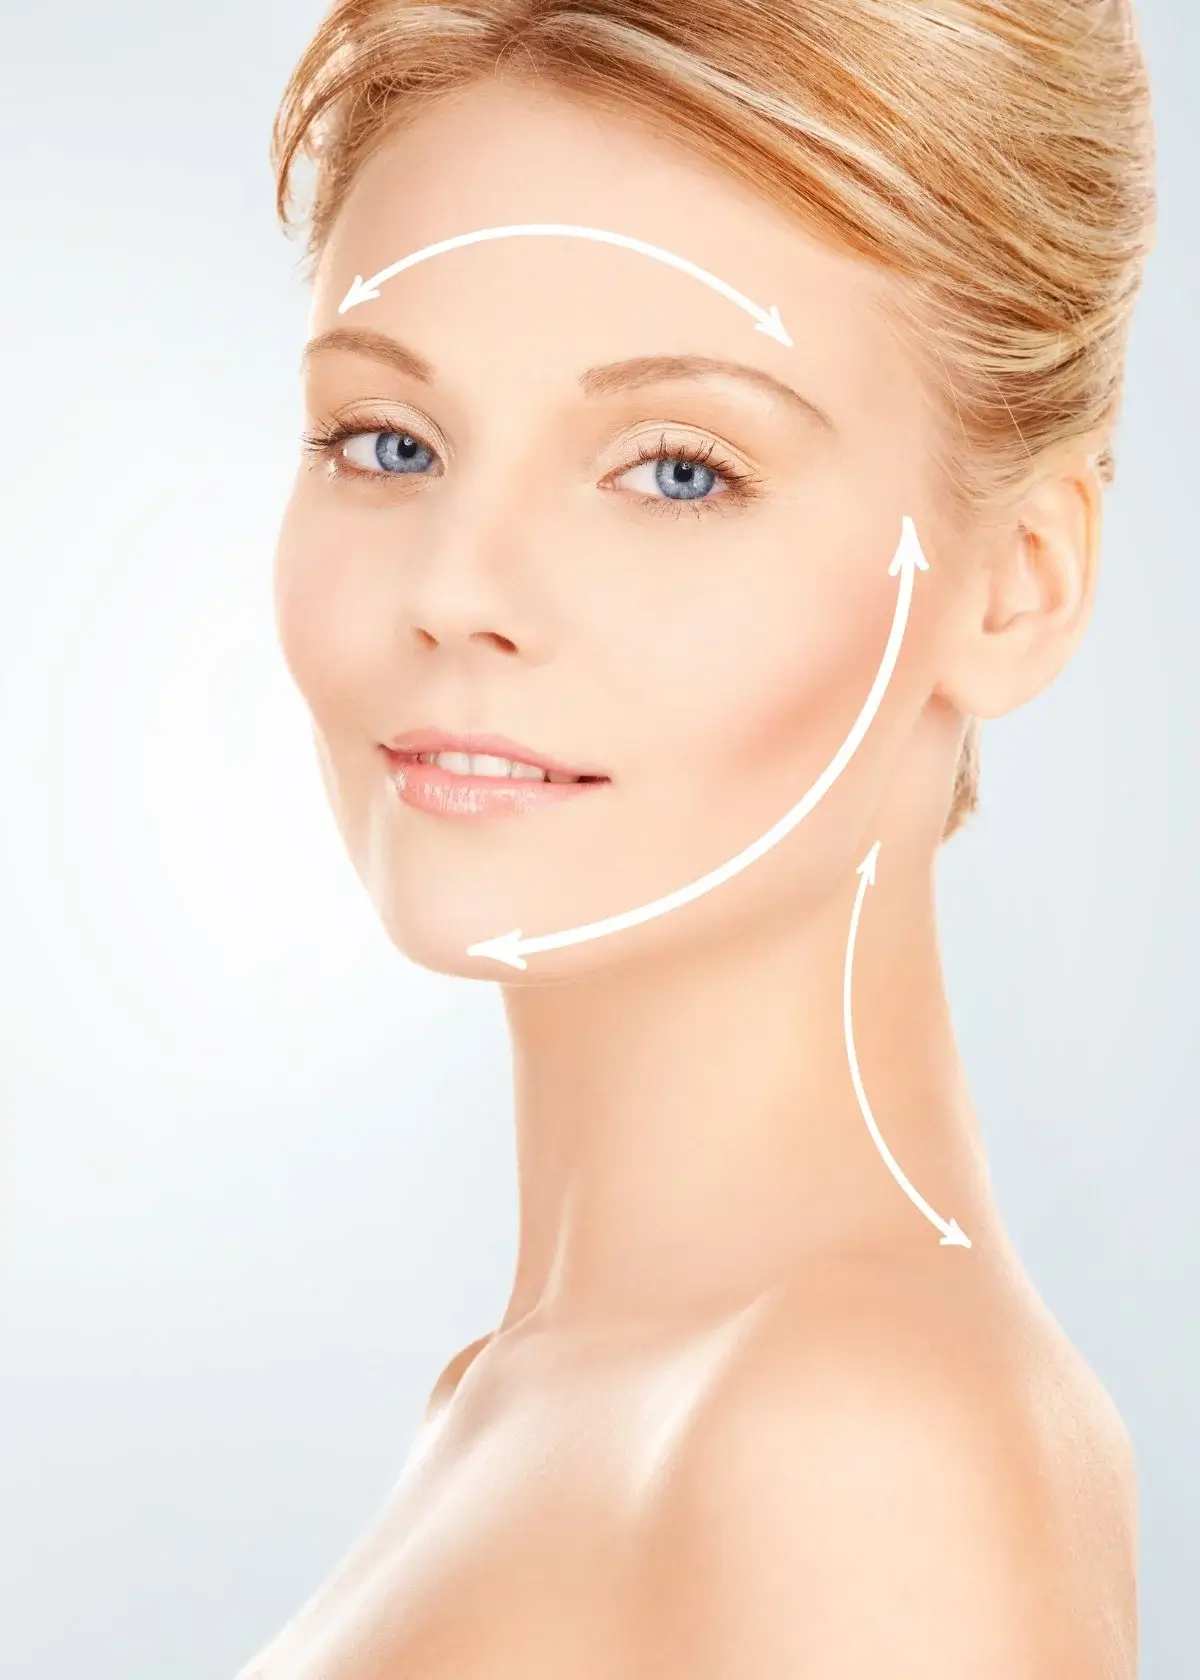 How to Use Facelift Tape?